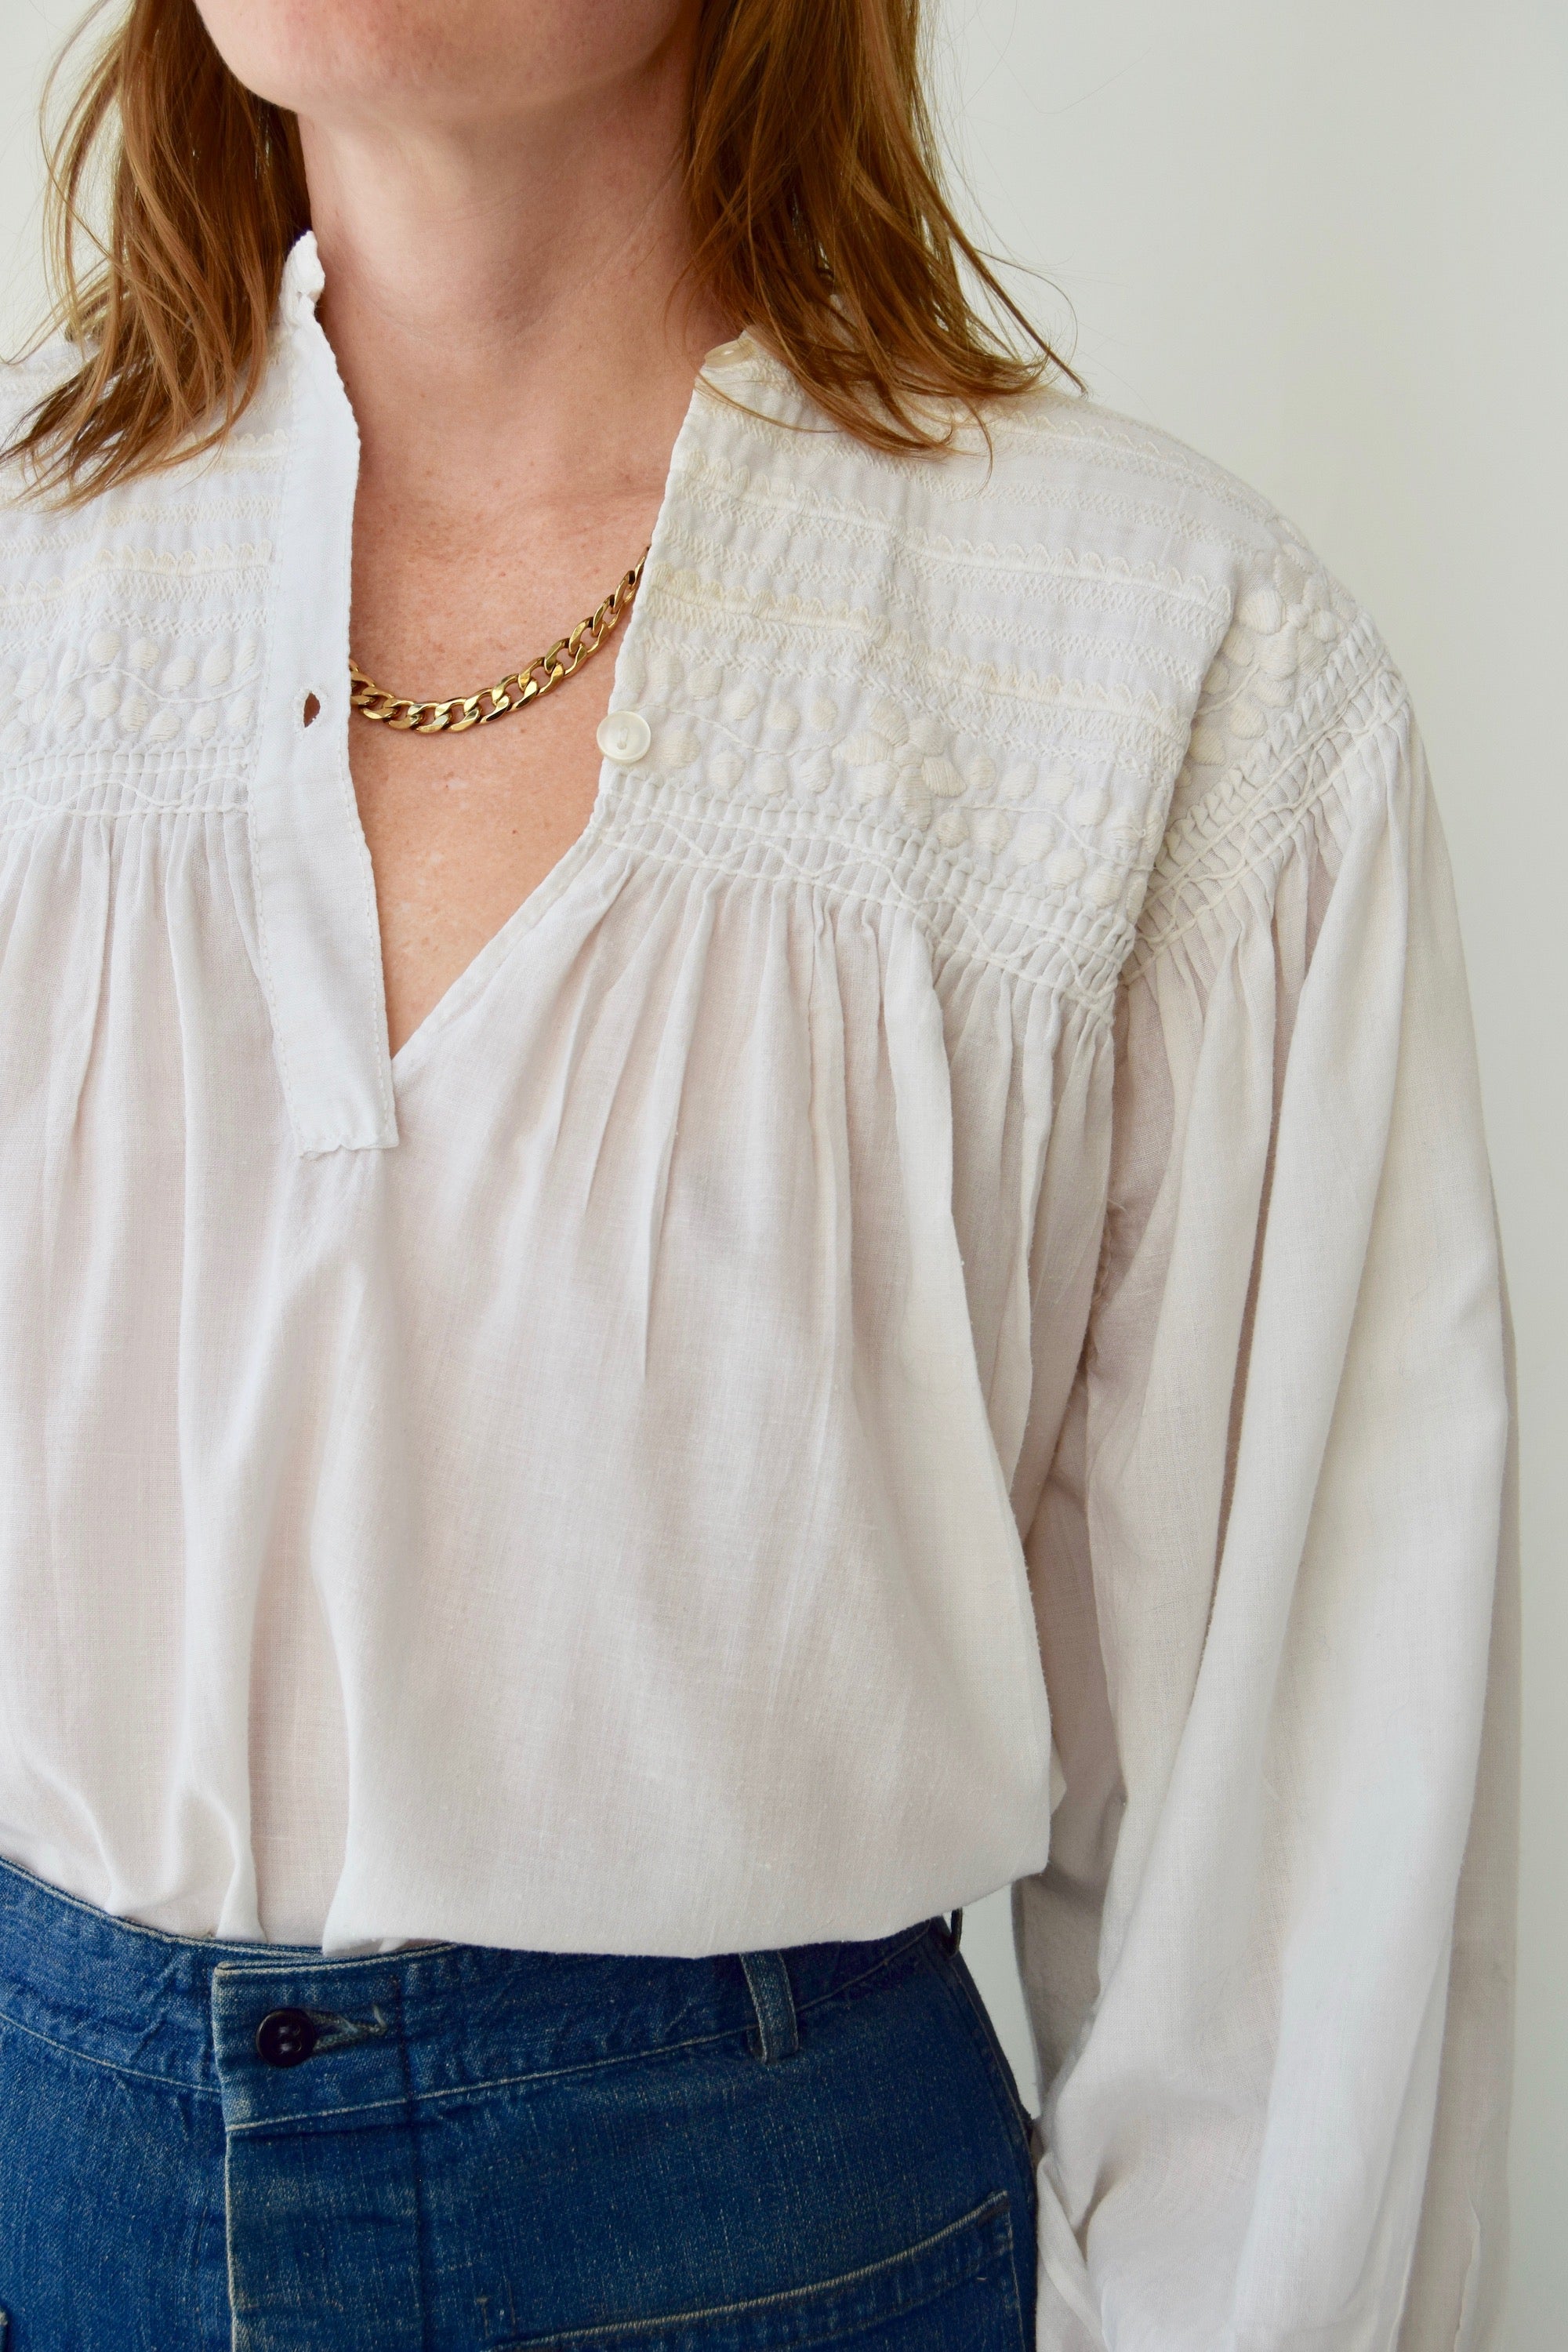 Vintage Hand Embroidered White Peasant Blouse